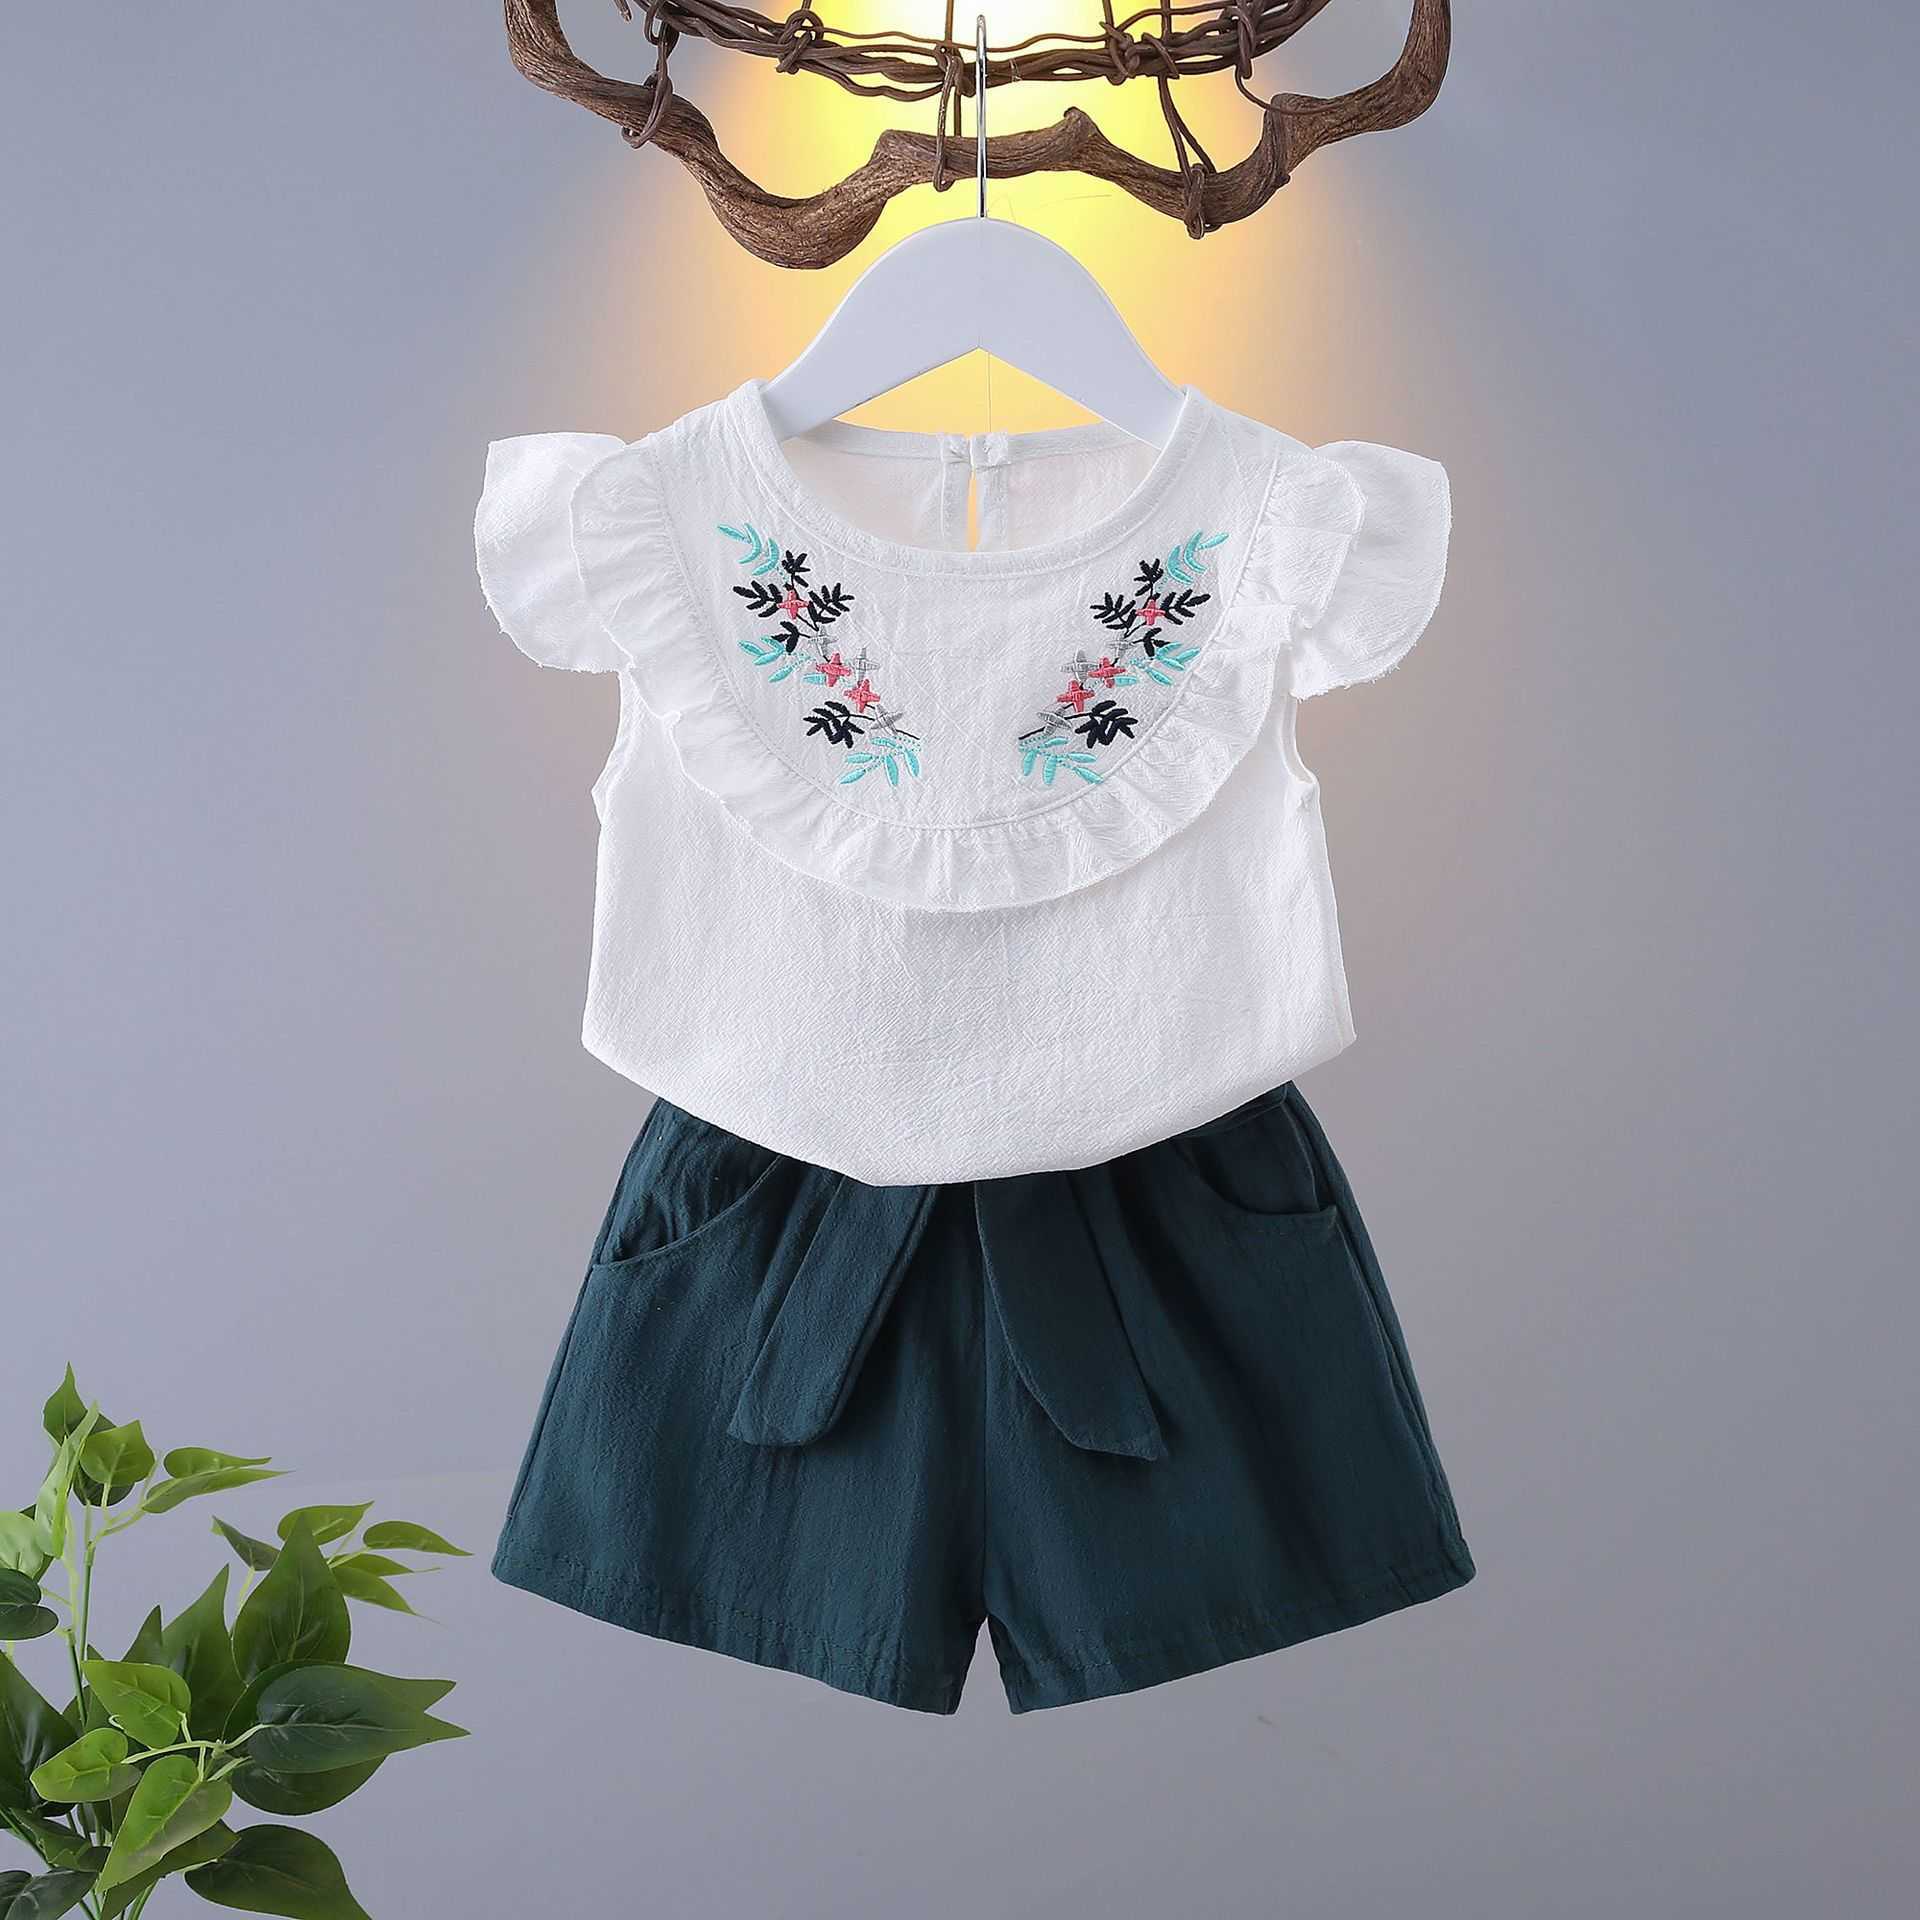 LZH Summer Casual Sports Suit Kids Costume Sleeveless Newborn Baby Clothing Sets For Girls Years Outfit